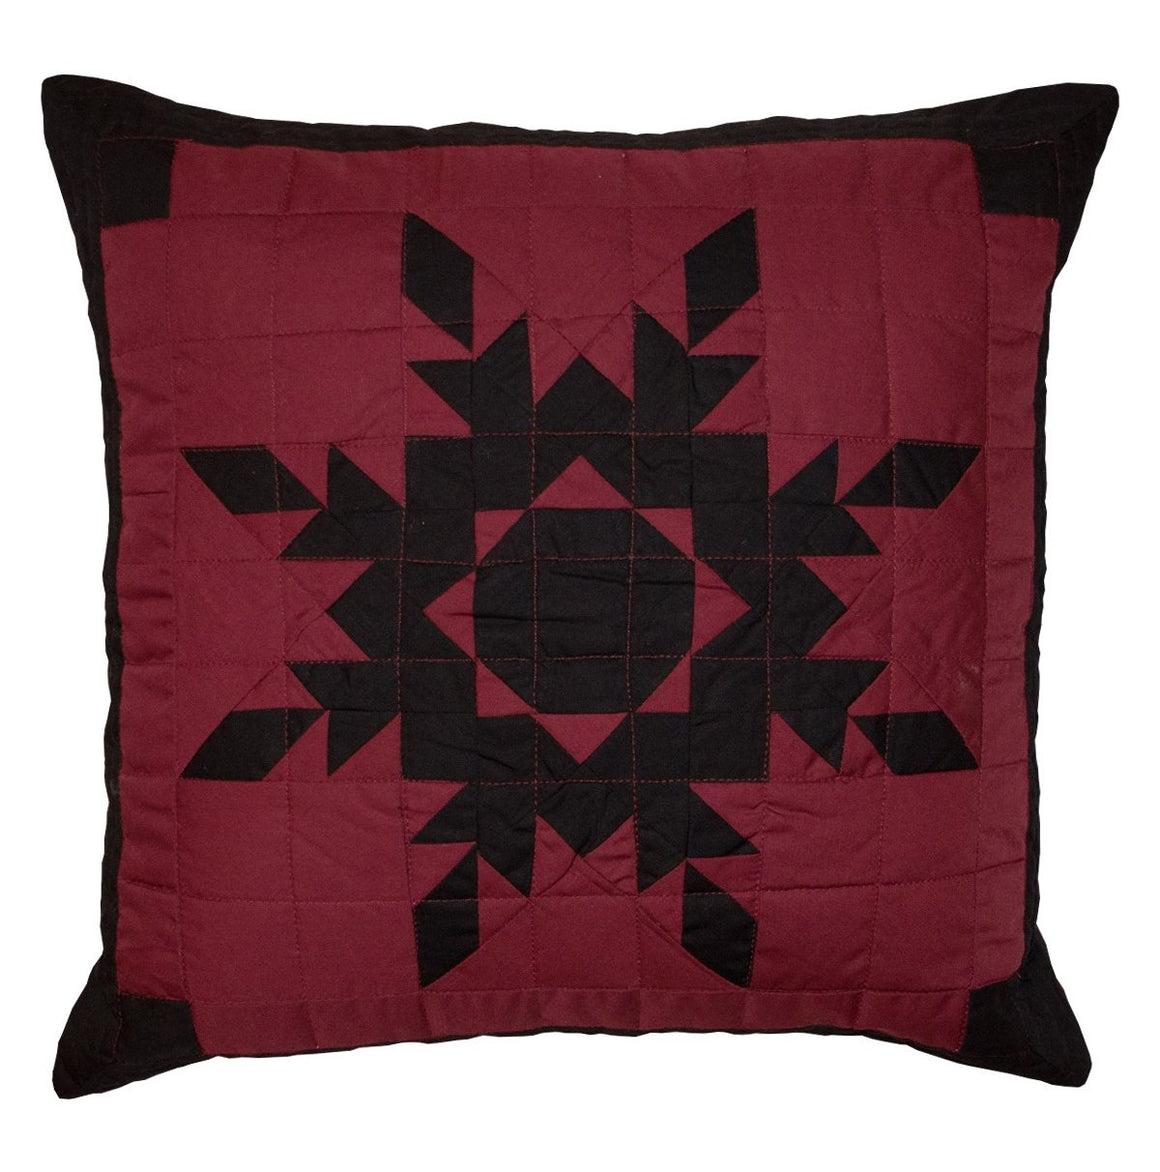 Black Feathered Star Pillow